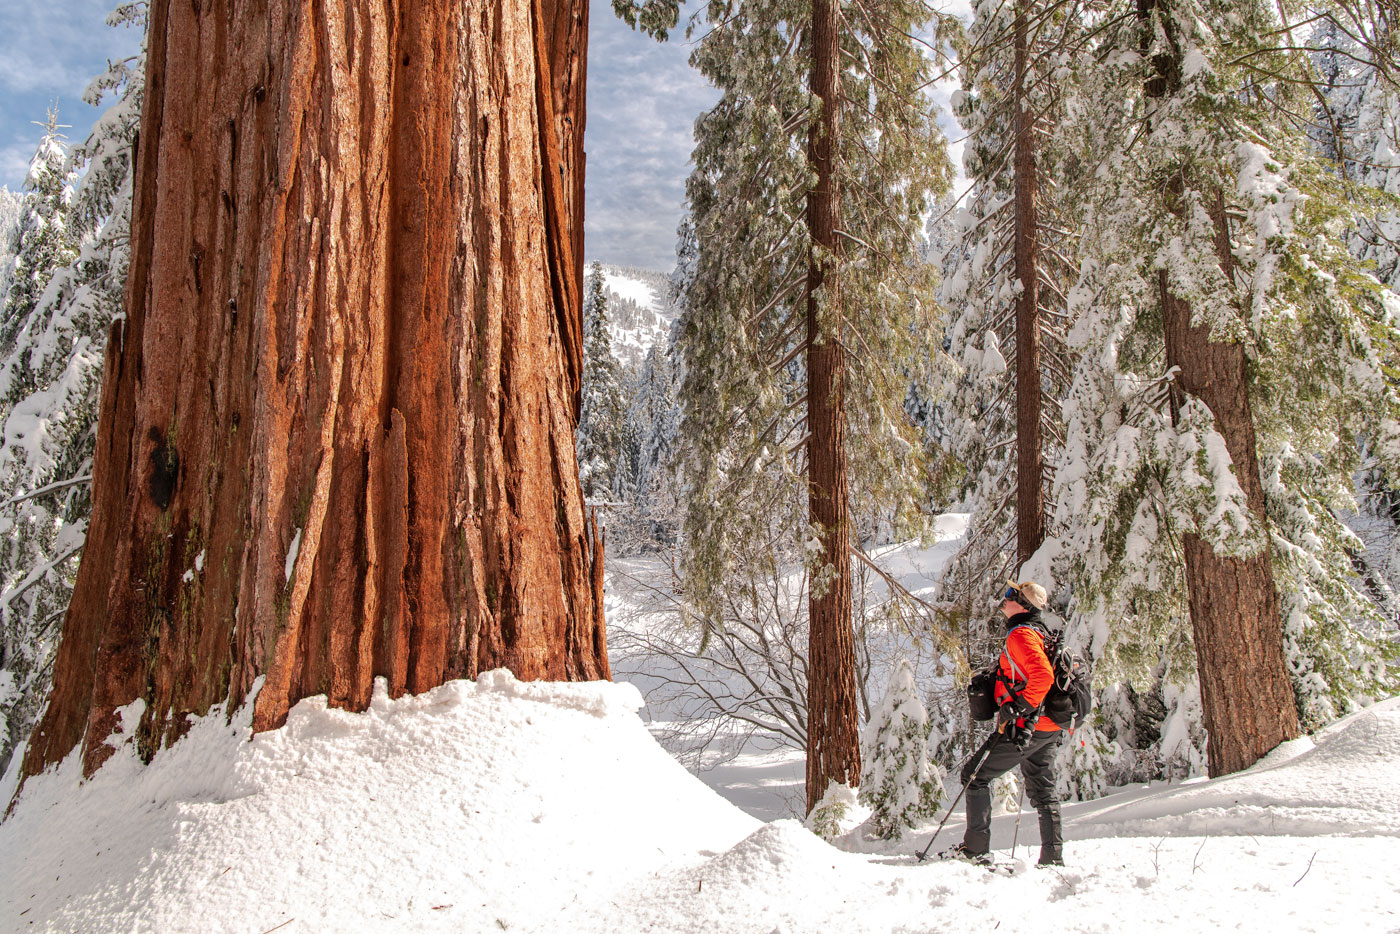 Following the acquisition of the property, the League intends to work with Giant Sequoia National Monument and the local and regional community to plan and implement long-term public access to the property that both inspires visitors with the beauty and power of nature and ensures the health and resilience of this rare forest ecosystem.